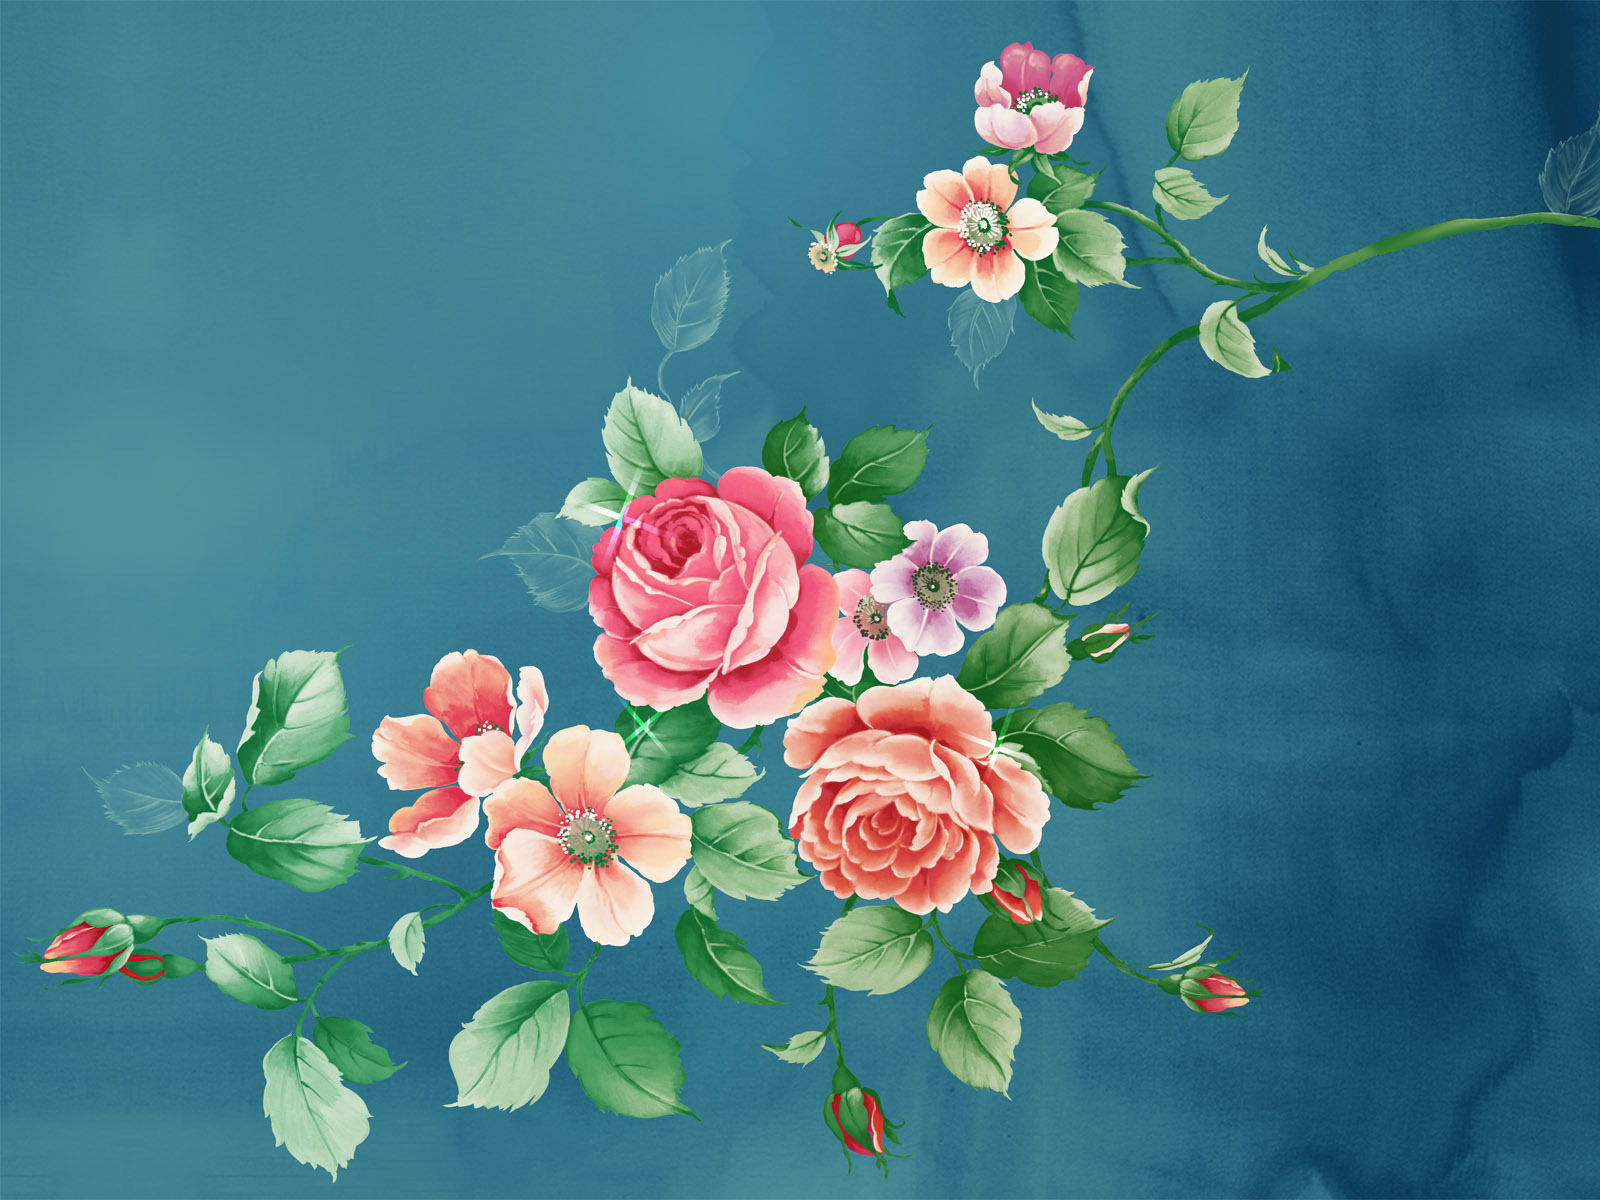 pictures, plants, roses, flowers, turquoise